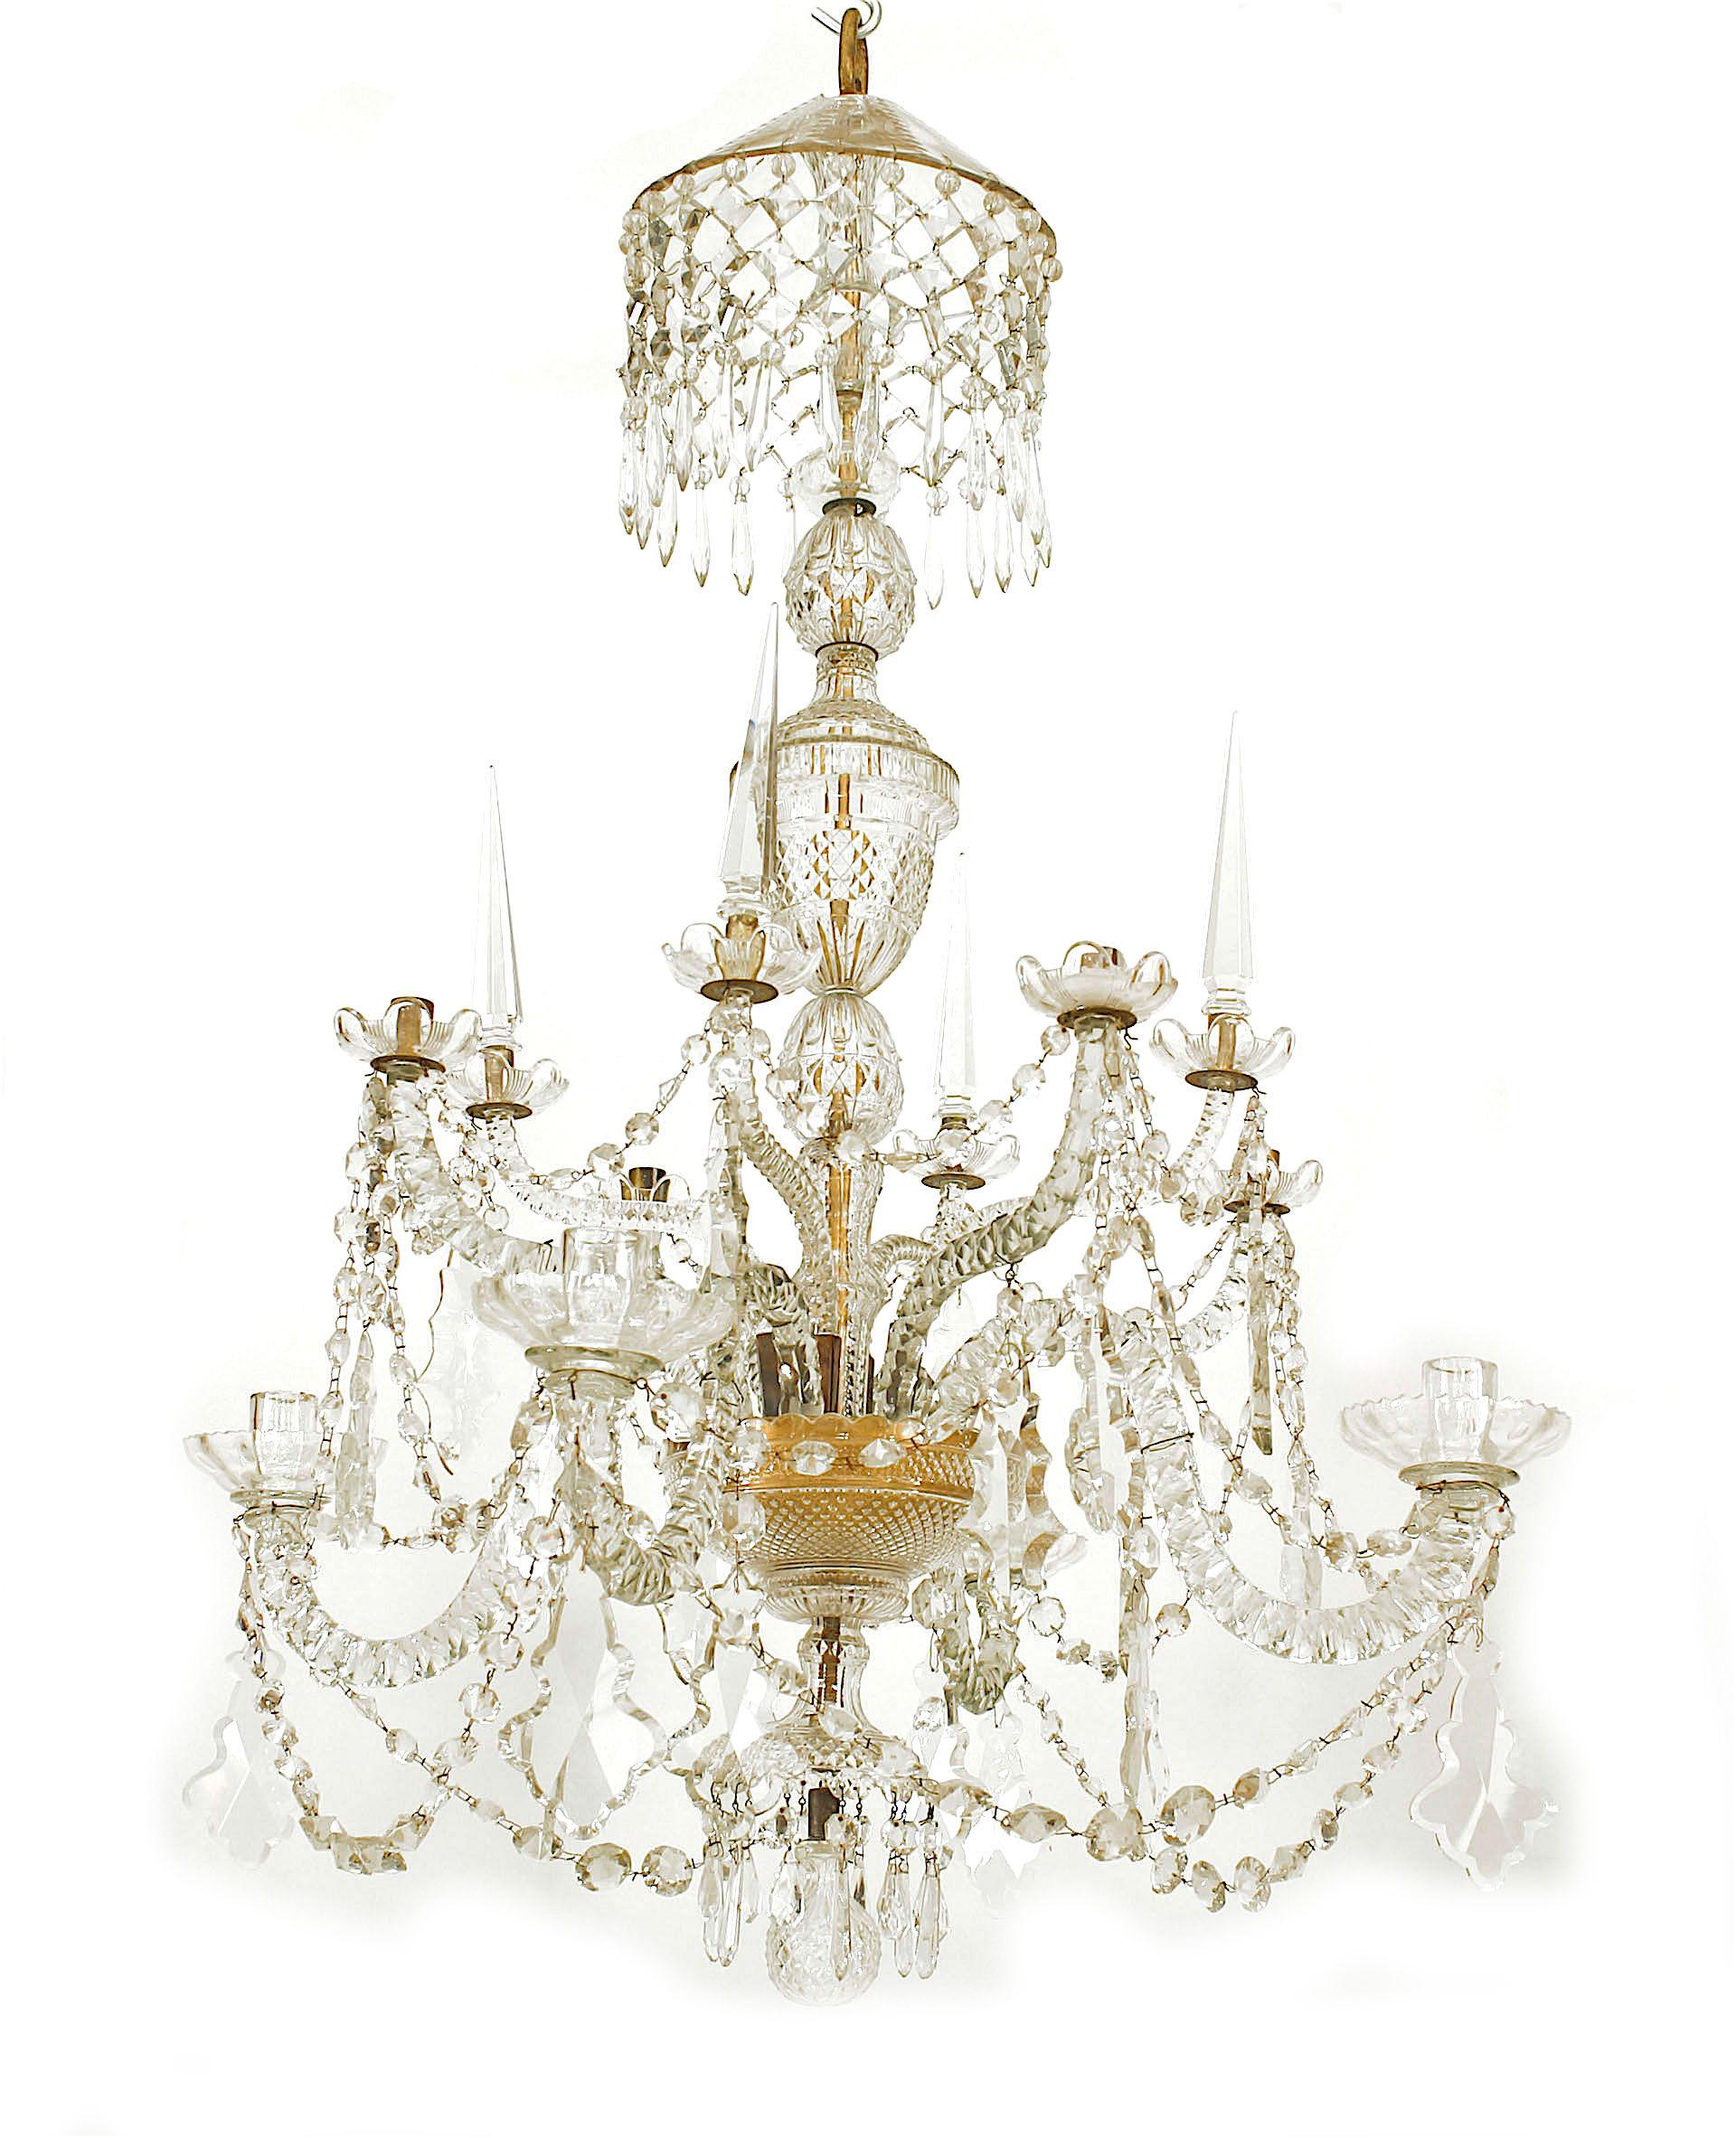 English Georgian 8 scroll arm cut crystal chandelier on 2 tiers with 4 arms with obelisks and 3 tiers of swags with a ball finial bottom (18th Century and latter additions).